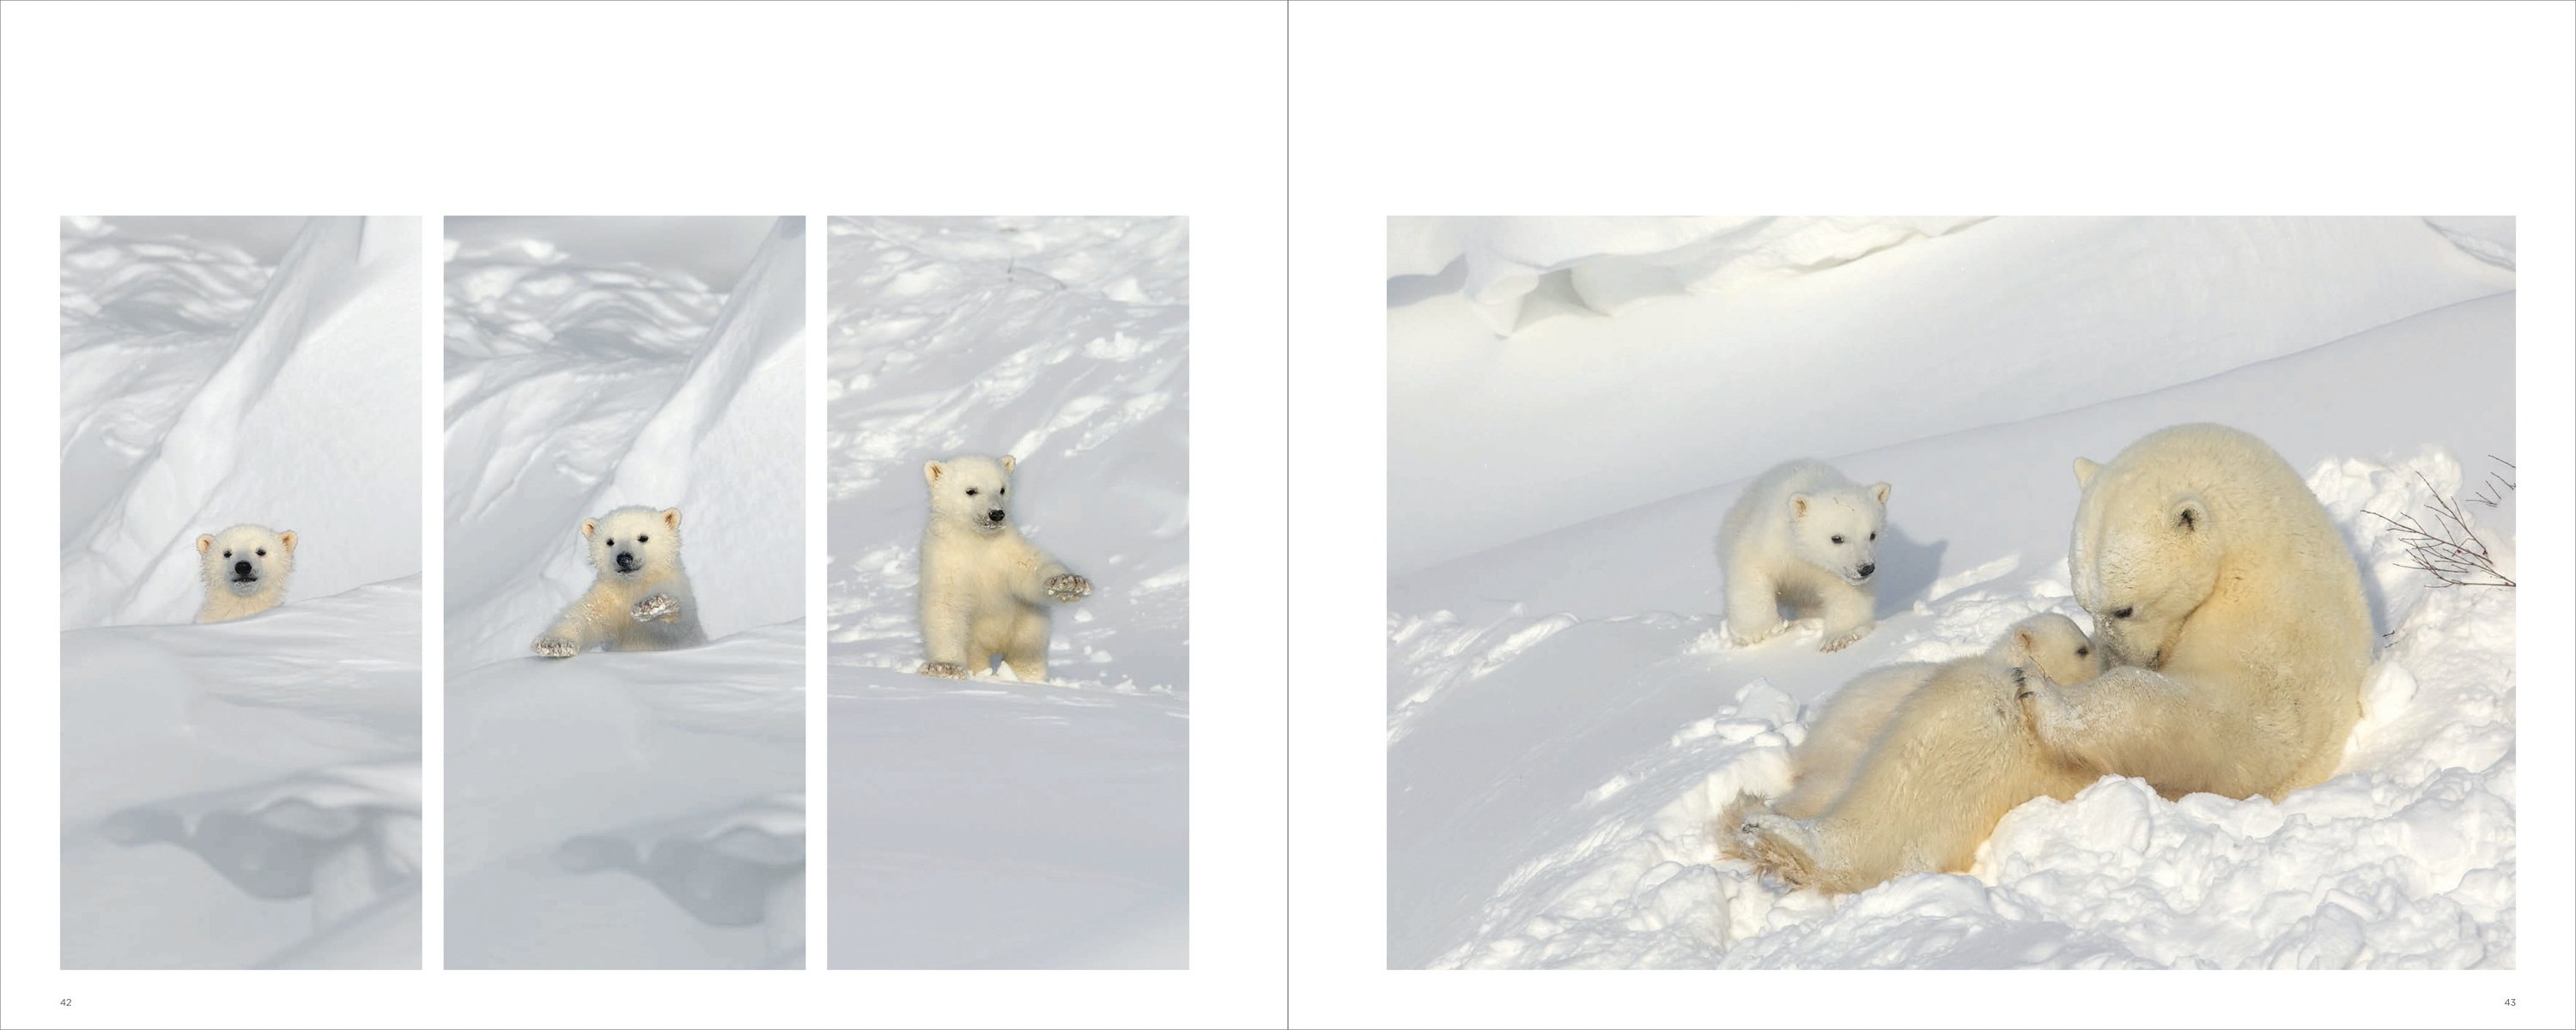 Adult polar bear with two cubs on snow, on cover of 'Polar Bears, A Life Under Threat', by ACC Art Books.